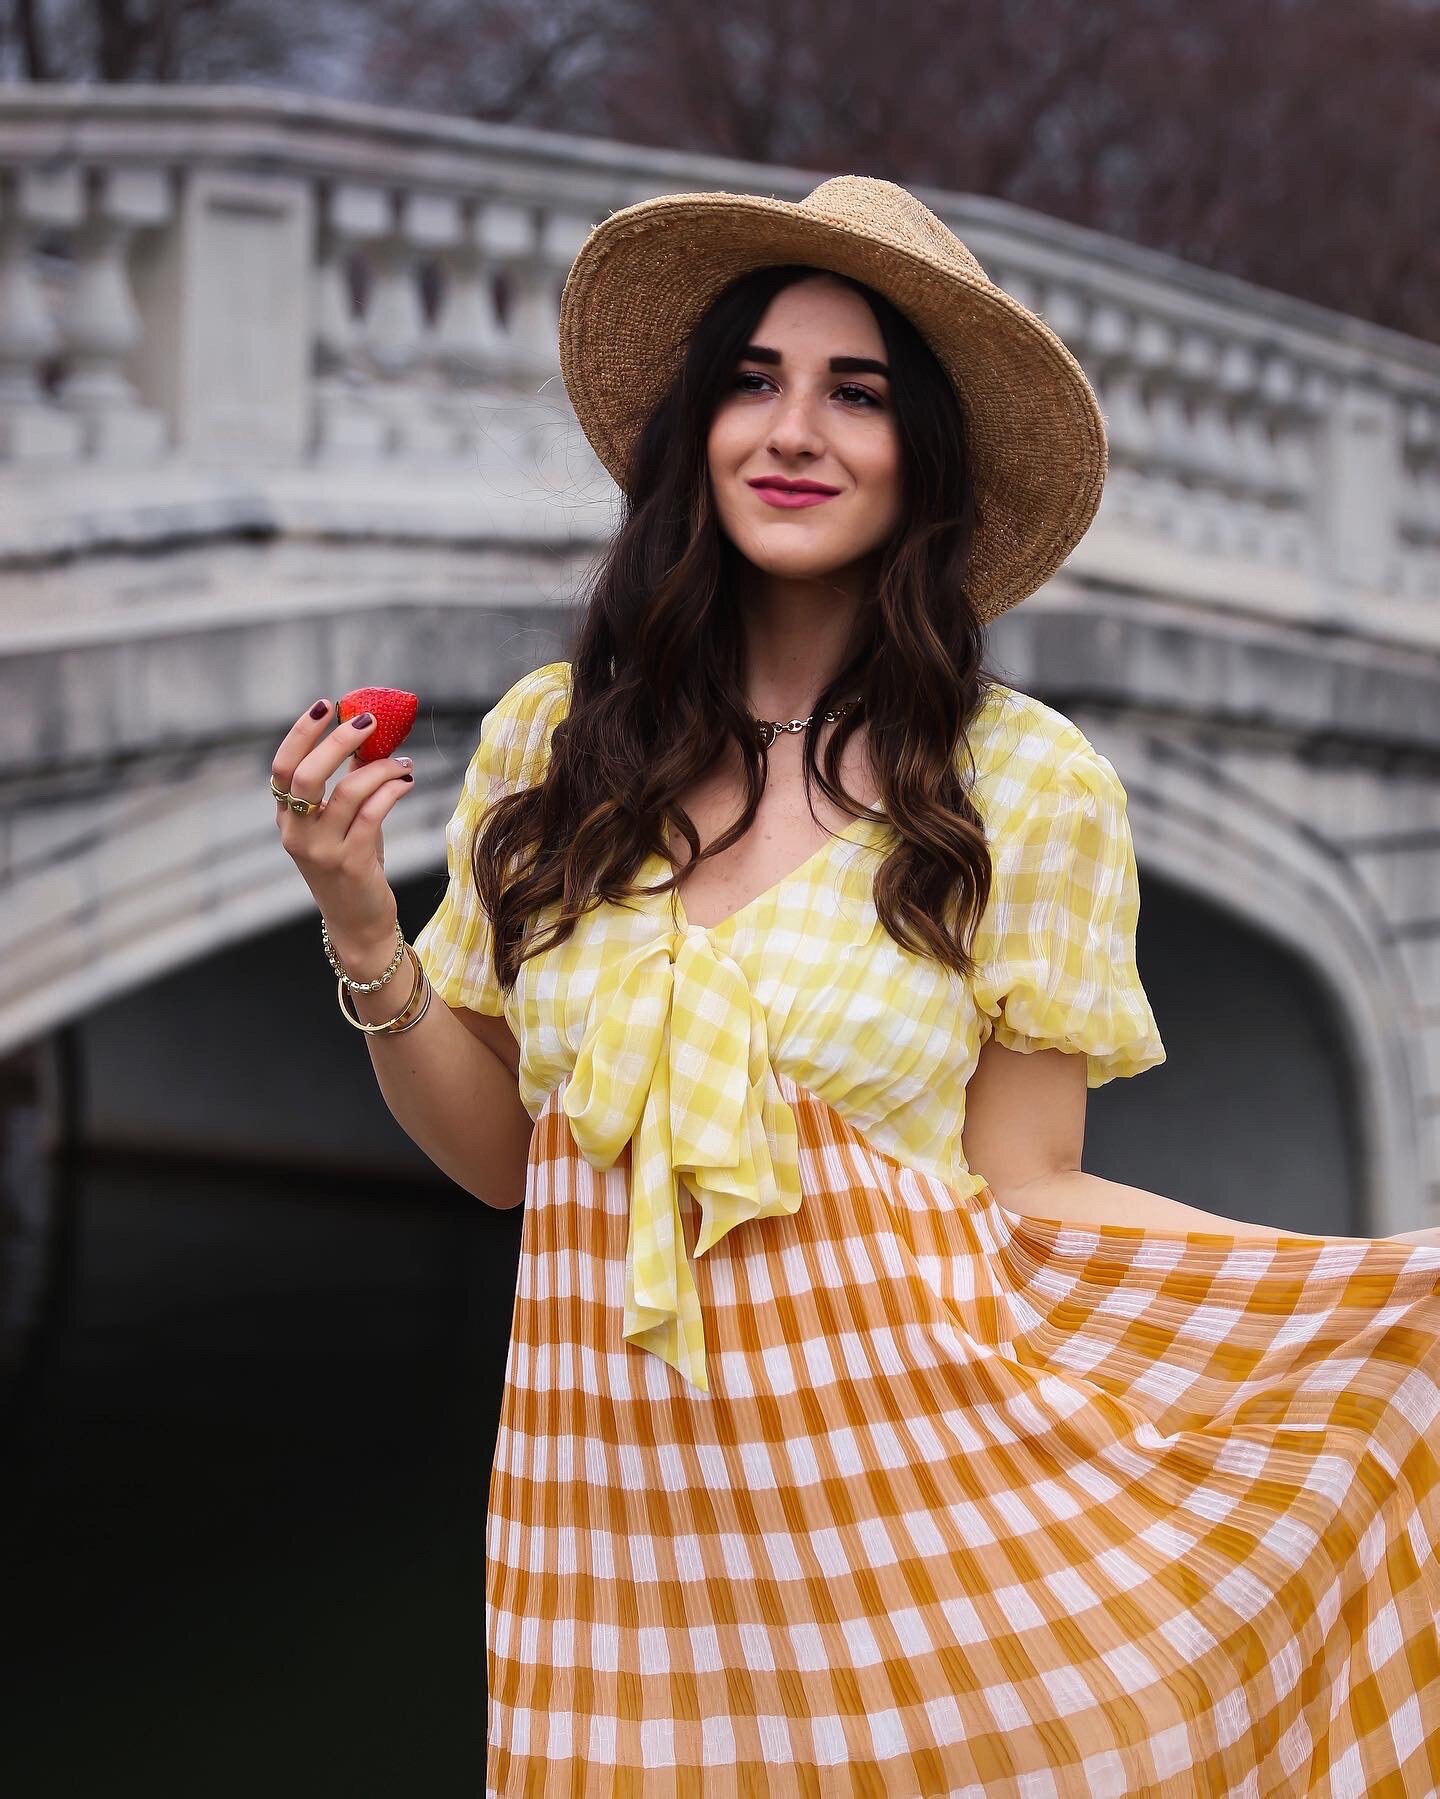 Gingham Midi Dress Summer Picnic Esther Santer NYC Street Style Fashion Blogger Fedora Checkered Maxi Orange Yellow Colorful Spring Stawberries Photoshoot St Louis Missouri Foxiedox Noa Initital Necklace Gold Bracelets Rings  Jewelry Forest Park Hat.JPG